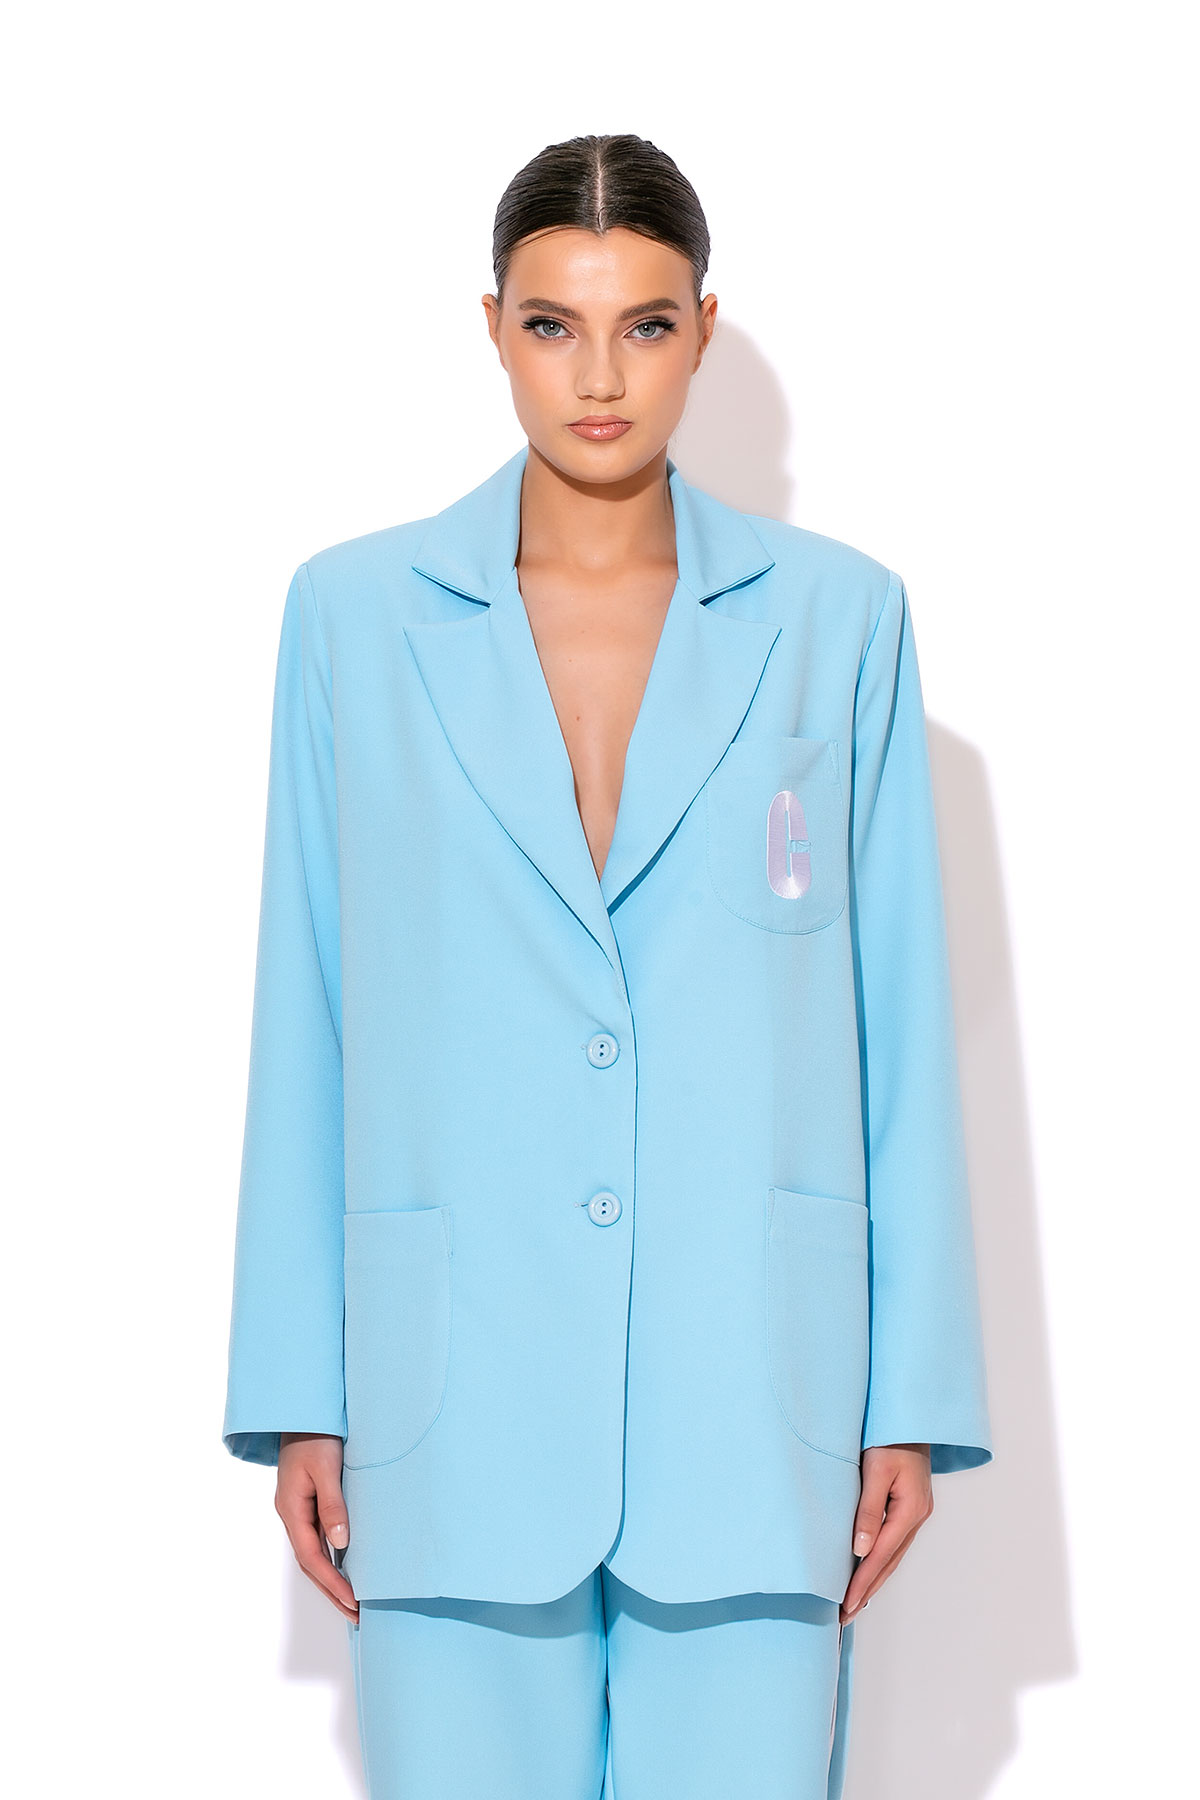 C-THROU Side-stripe Crepe Oversized Blazer. This Oversize Blazer is perfect for anytime wear with an easy, relaxed feel.